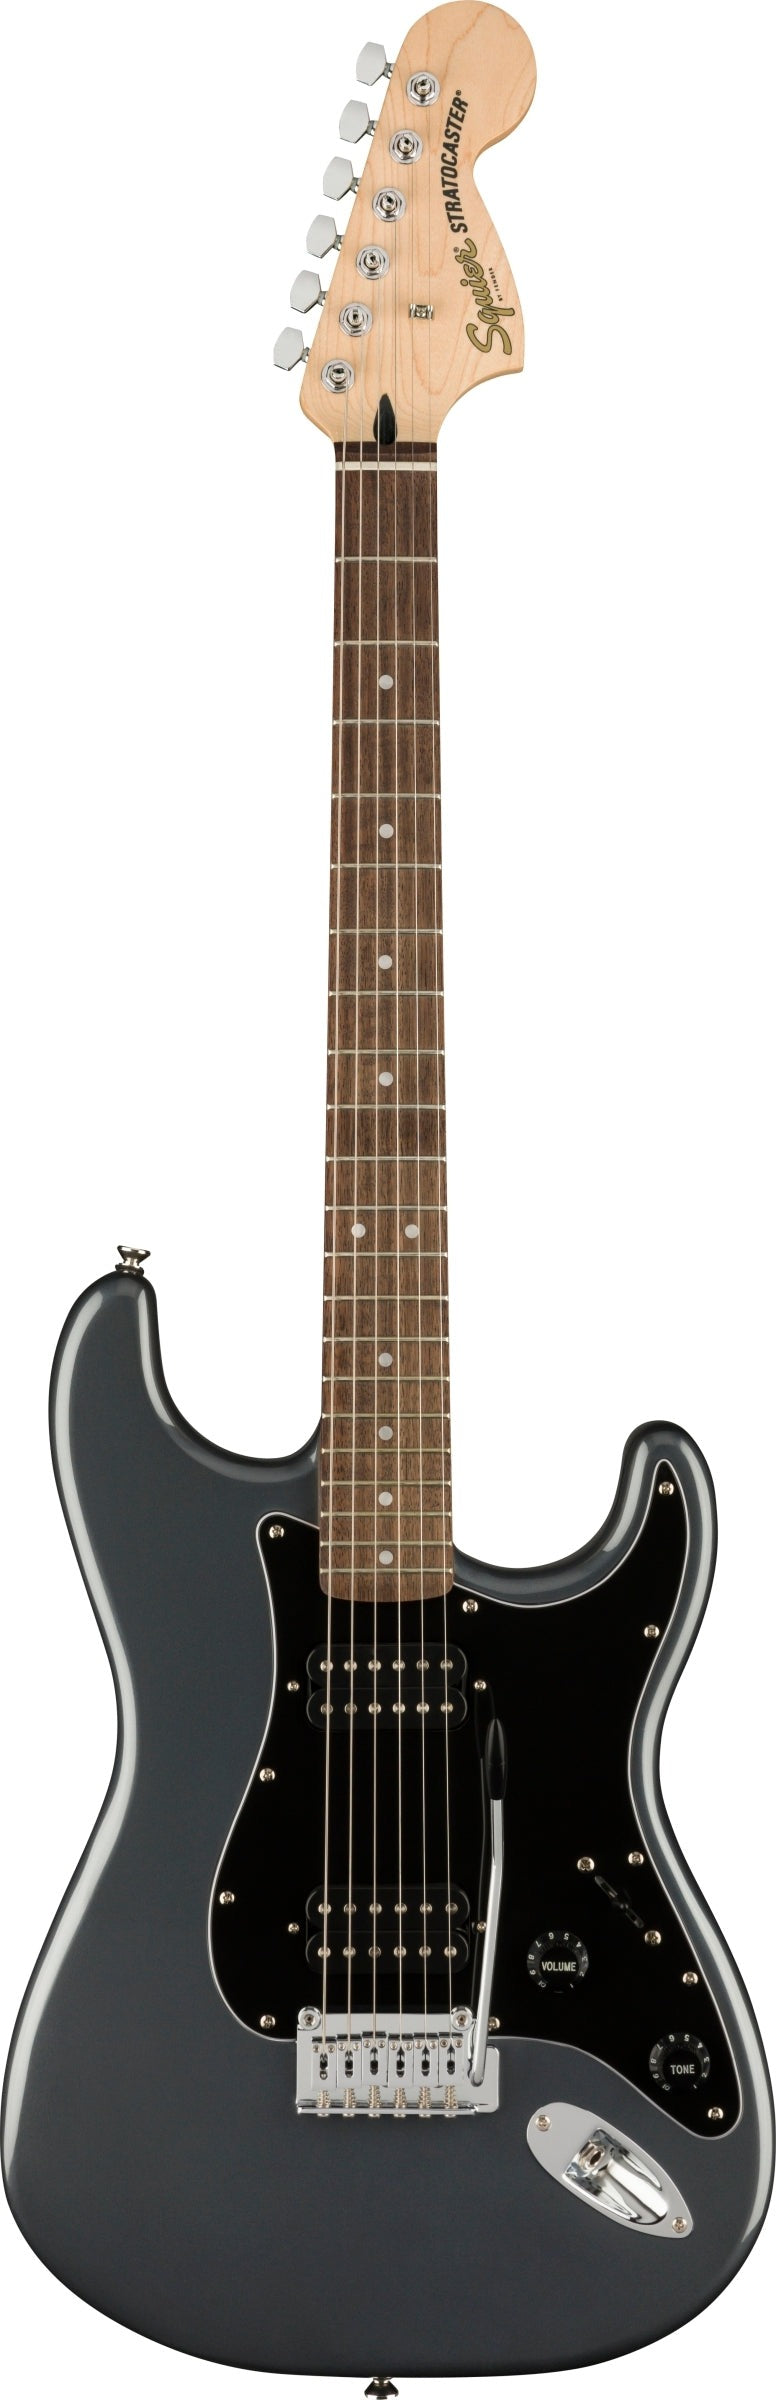 Squier Affinity Series Stratocaster Electric Guitar - Charcoal Frost Metallic